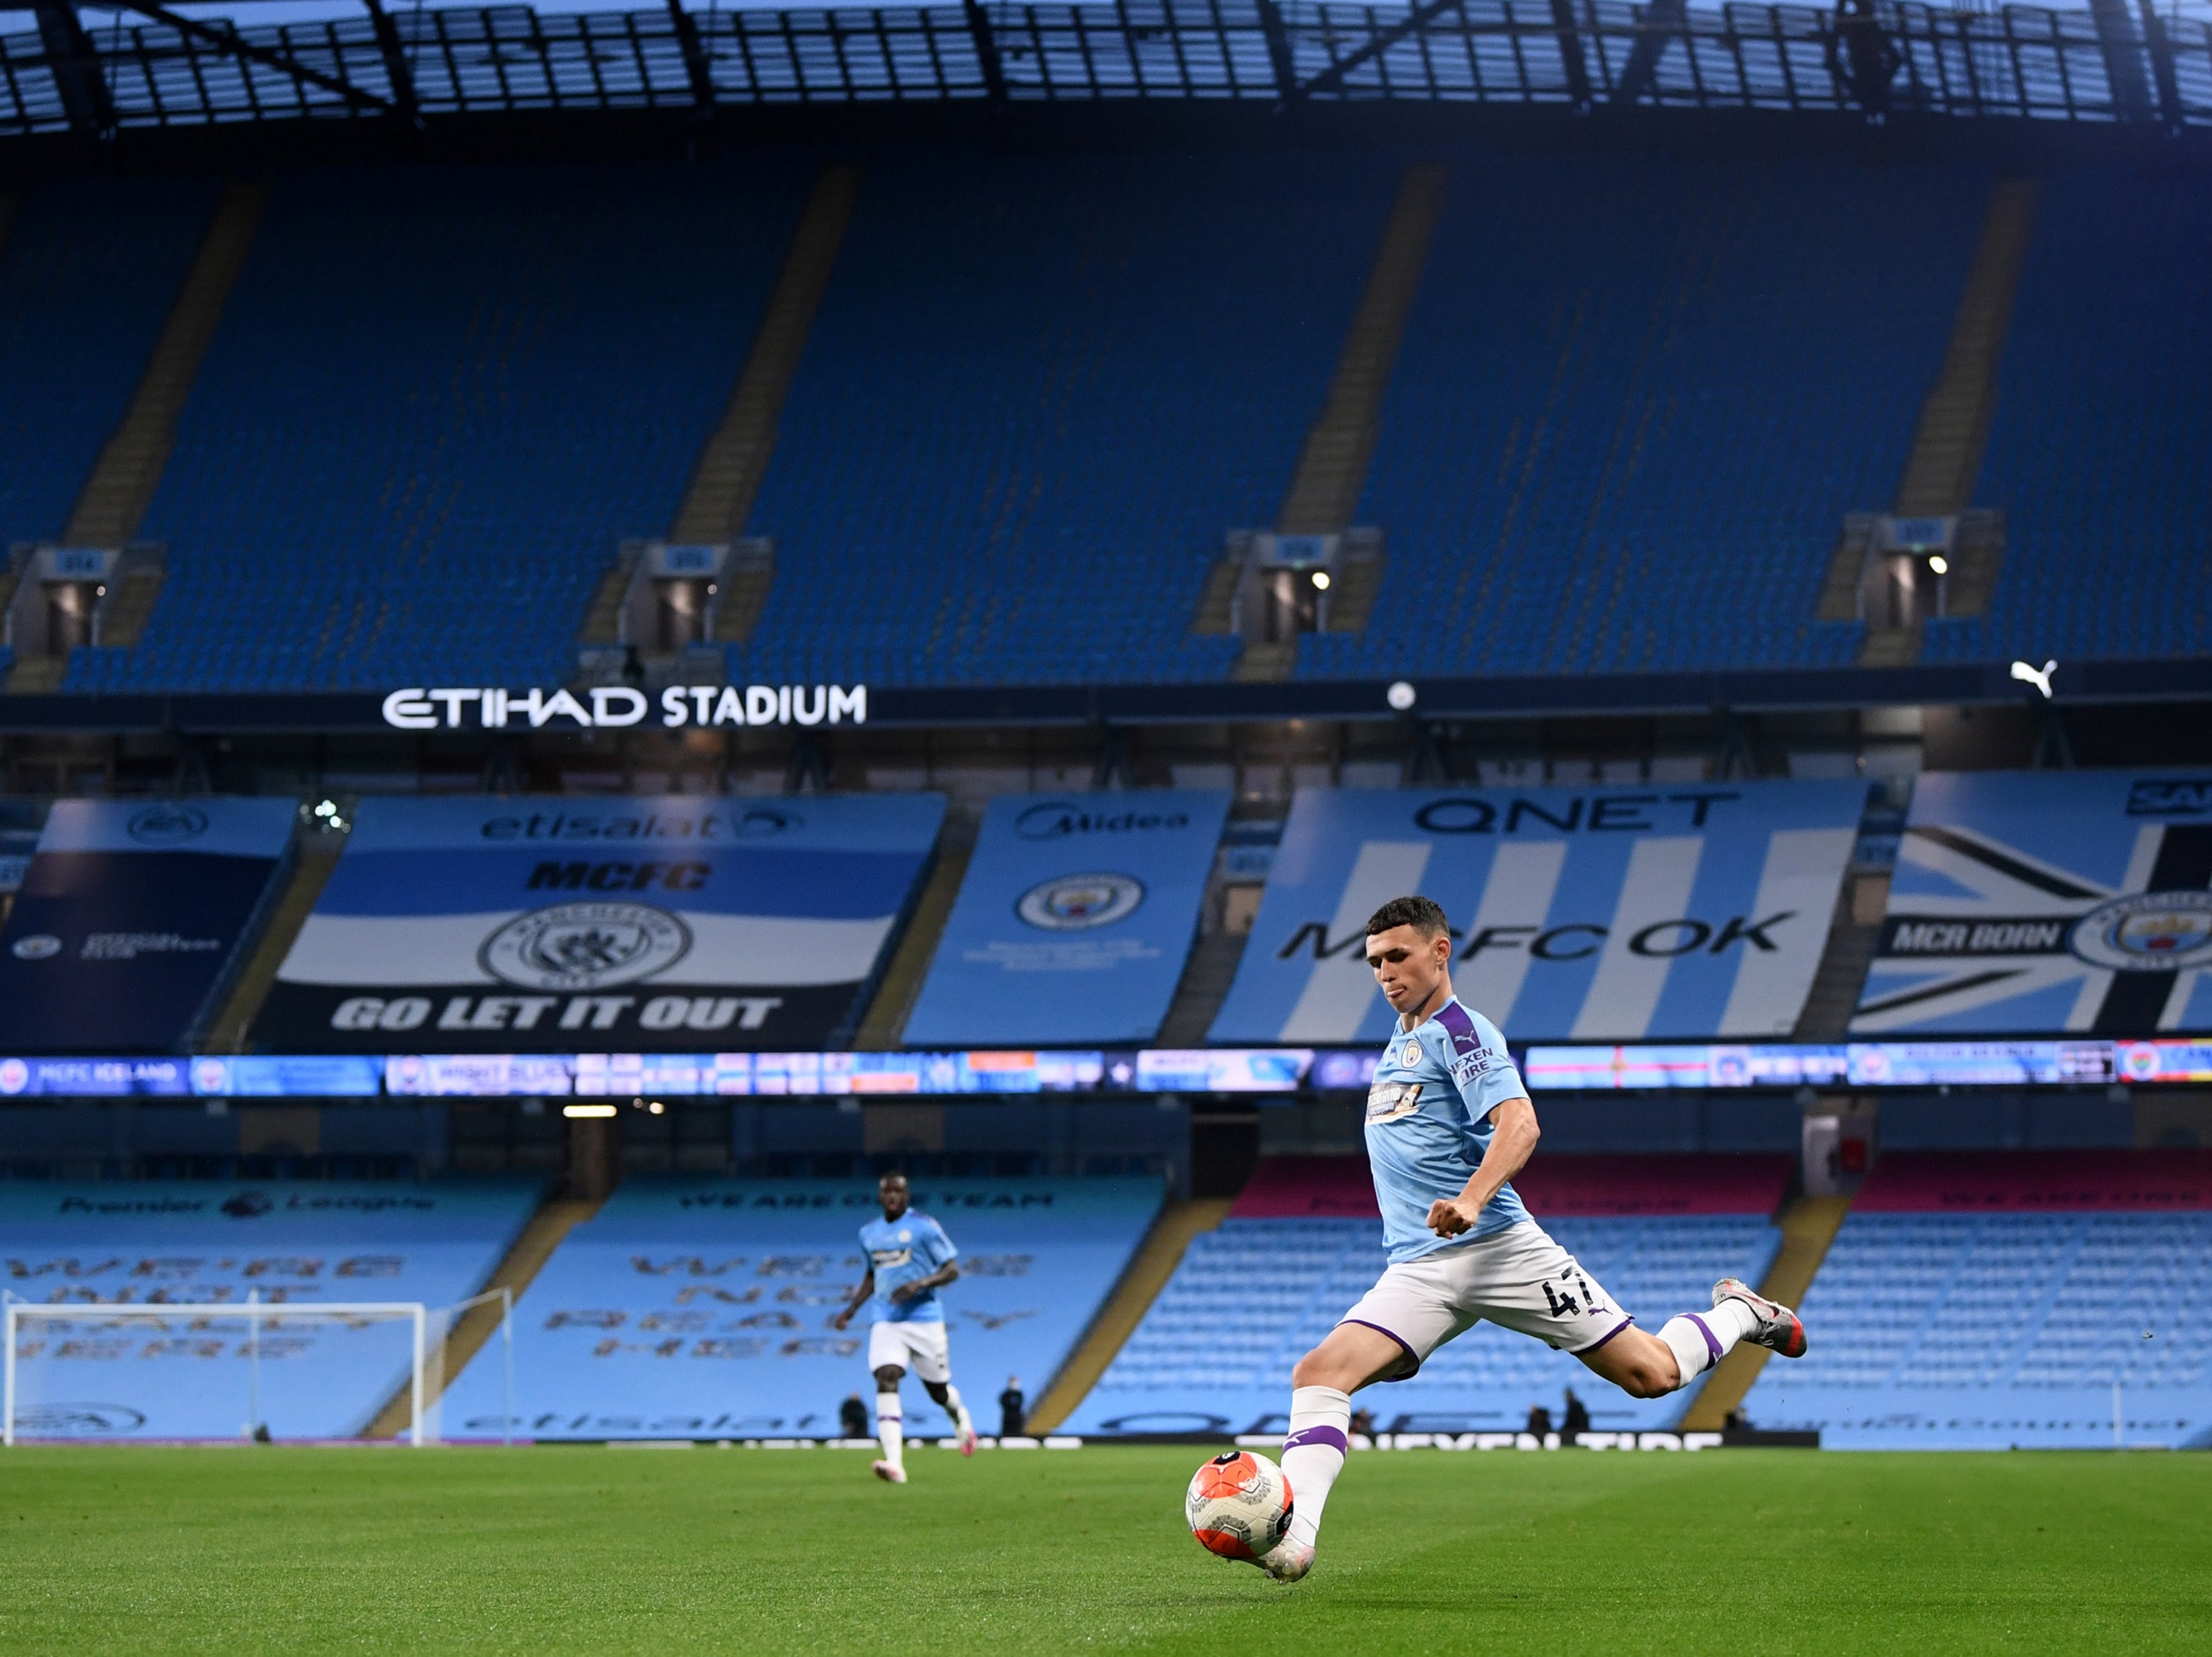 Manchester City’s Phil Foden playing at the Etihad behind closed doors